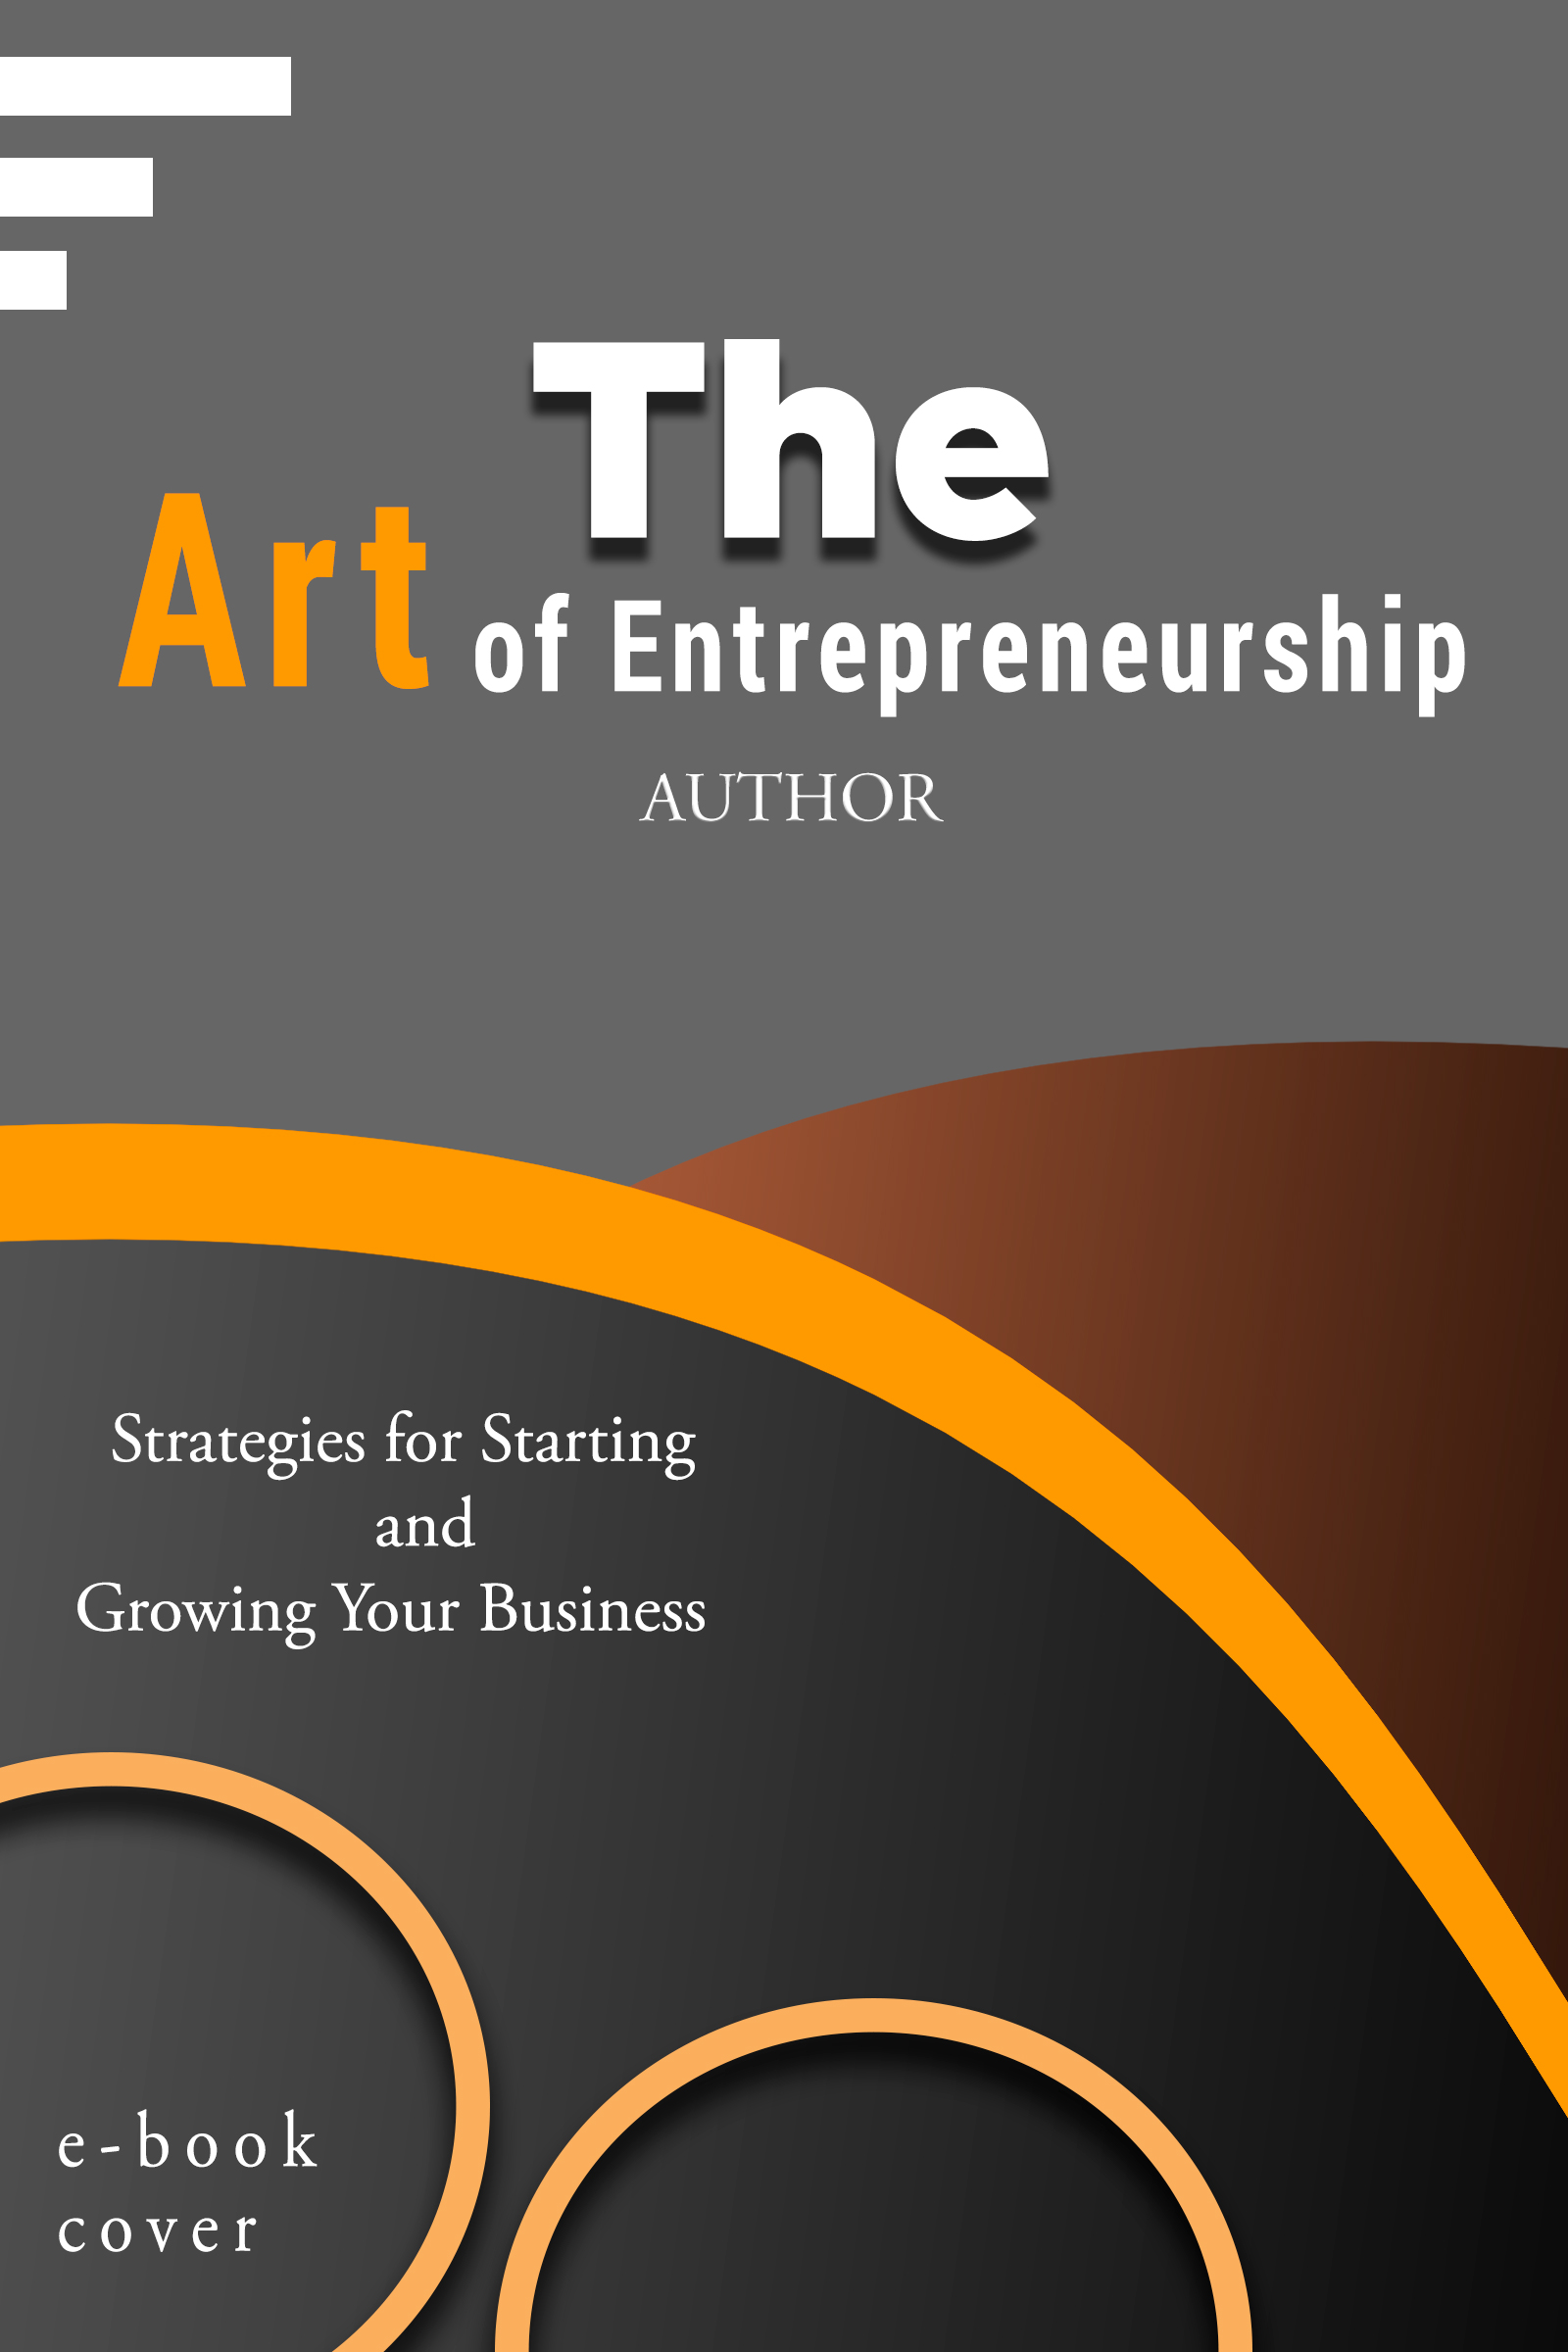 The cover of the book the art of entrepreneurship.